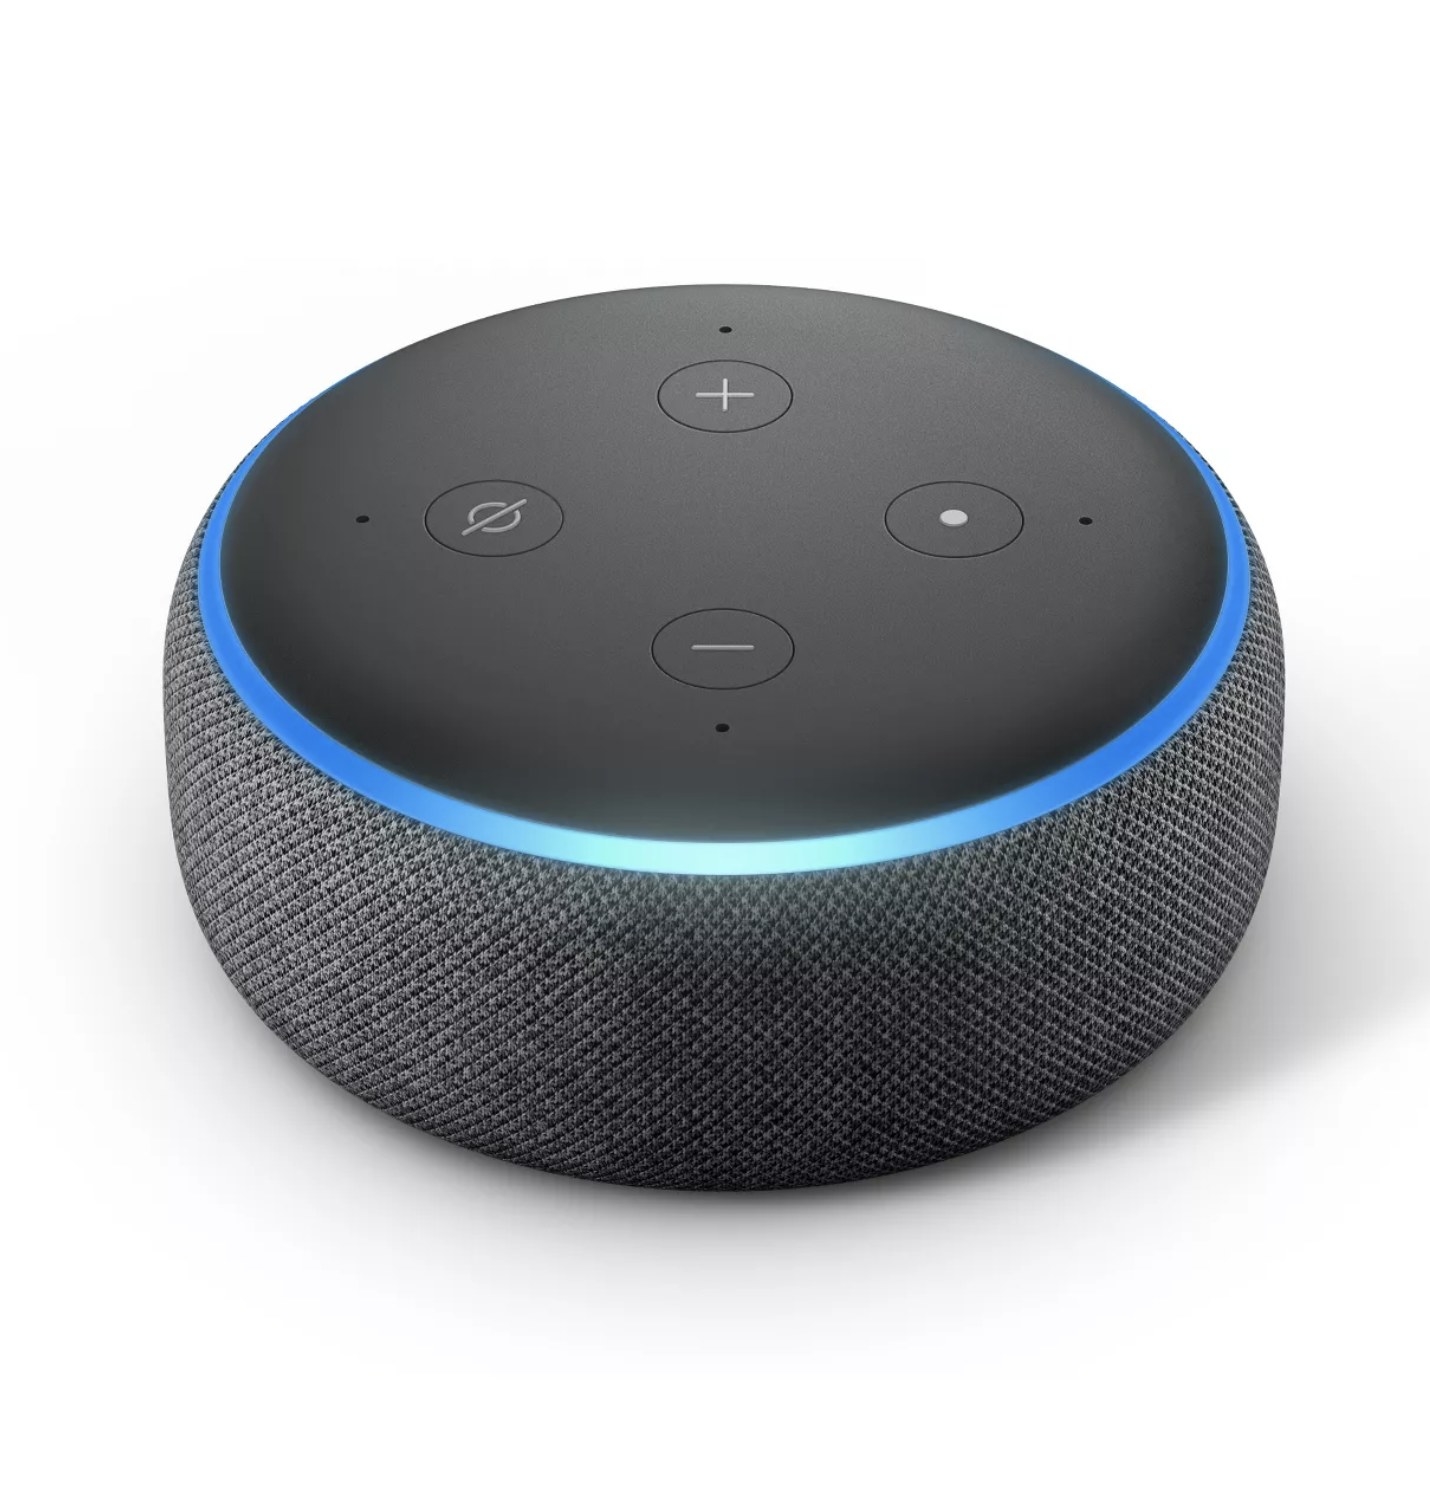 The top of an Echo Dot with the blue ring lit up